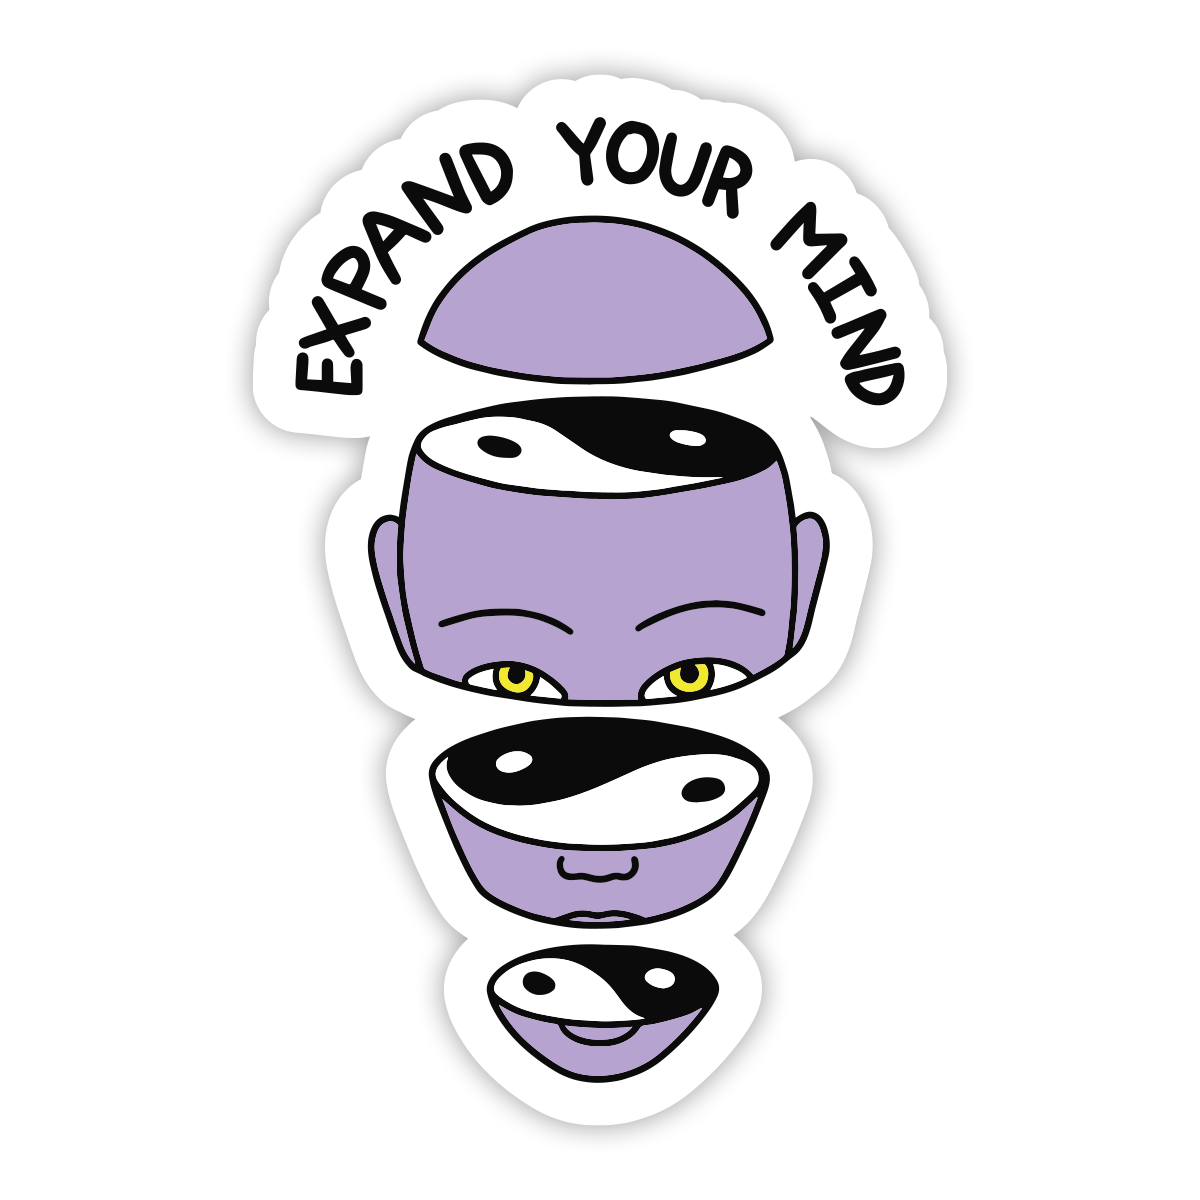 Expand Your Mind Sticker